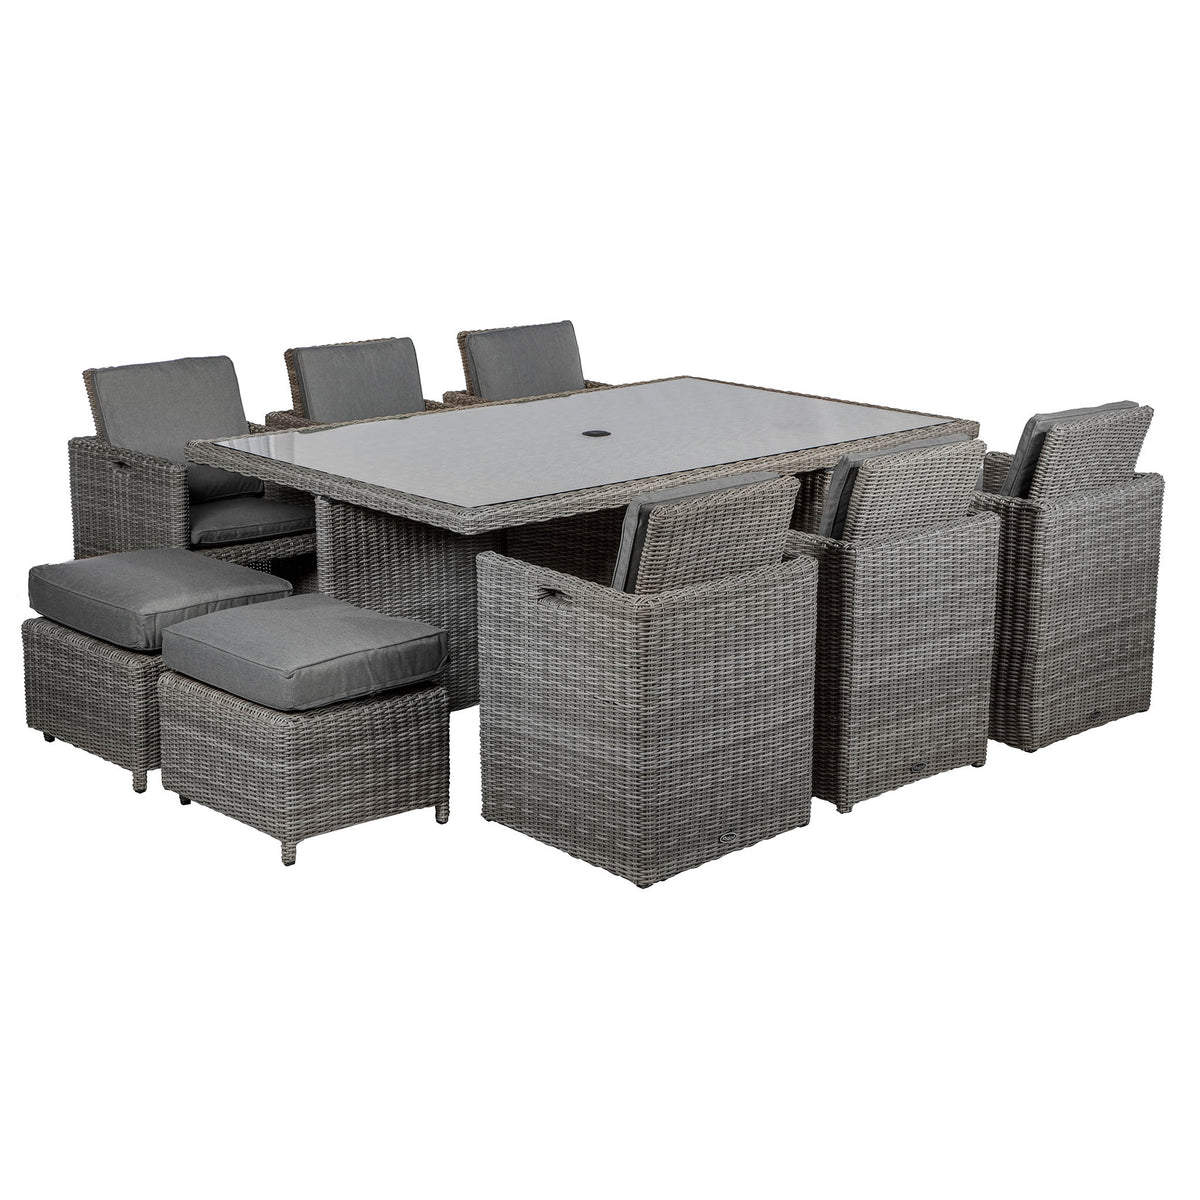 Paris 10 Seat Lux Rattan Cube Garden Dining Set from Roseland Home Furniture